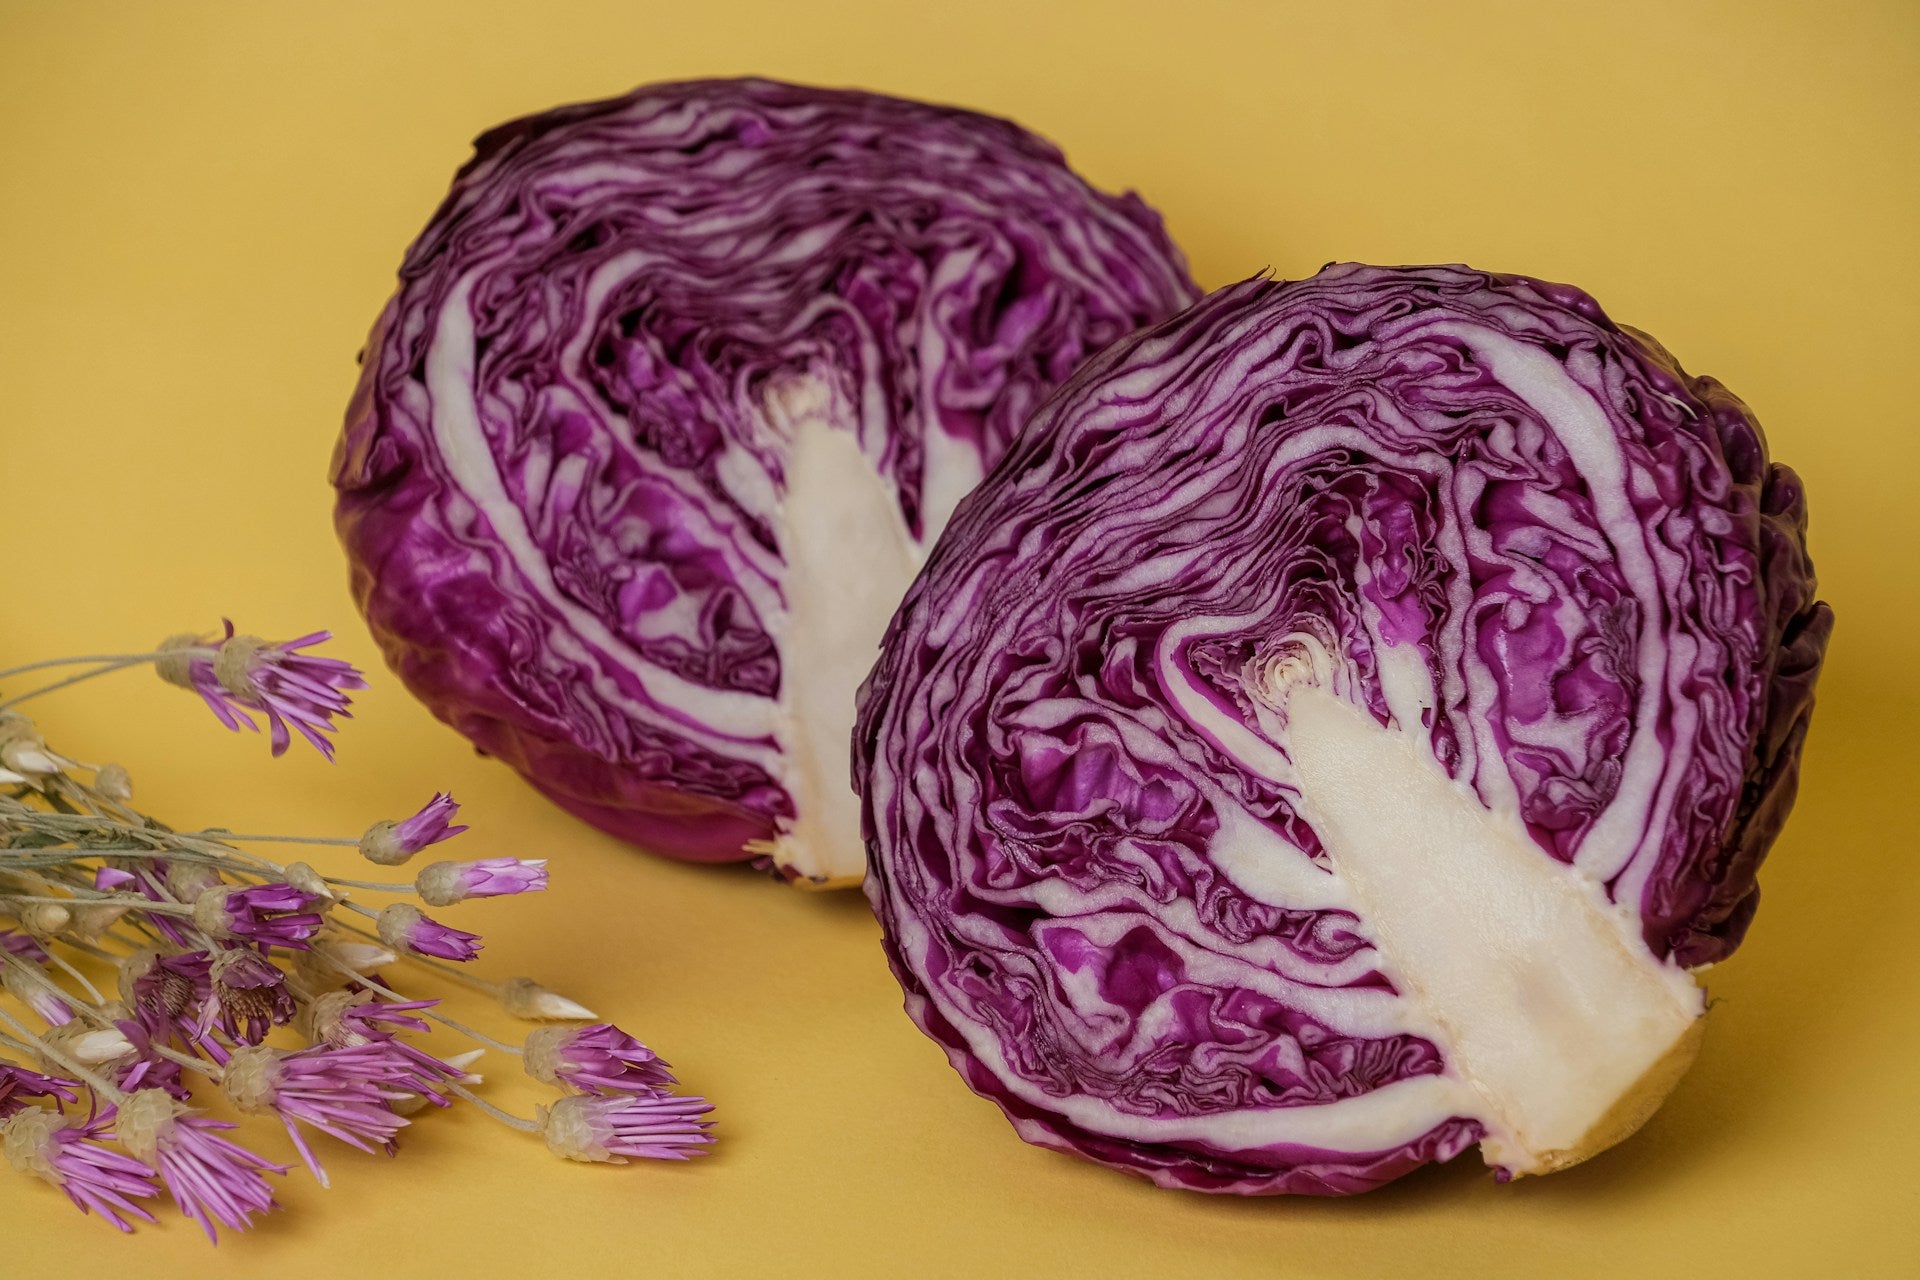 On display is a single head of cabbage, of the variety Red Acre, which has been chopped in half. The 2 halves are both positioned so we can view the middle flesh.  The red and white color transitions within the cabbage are clearly visible.  We can also see the white stalk in the center of the cabbage, also cut in half. The stalk is wider at the periphery of the head, and narrows as it works it way to the center of the head.